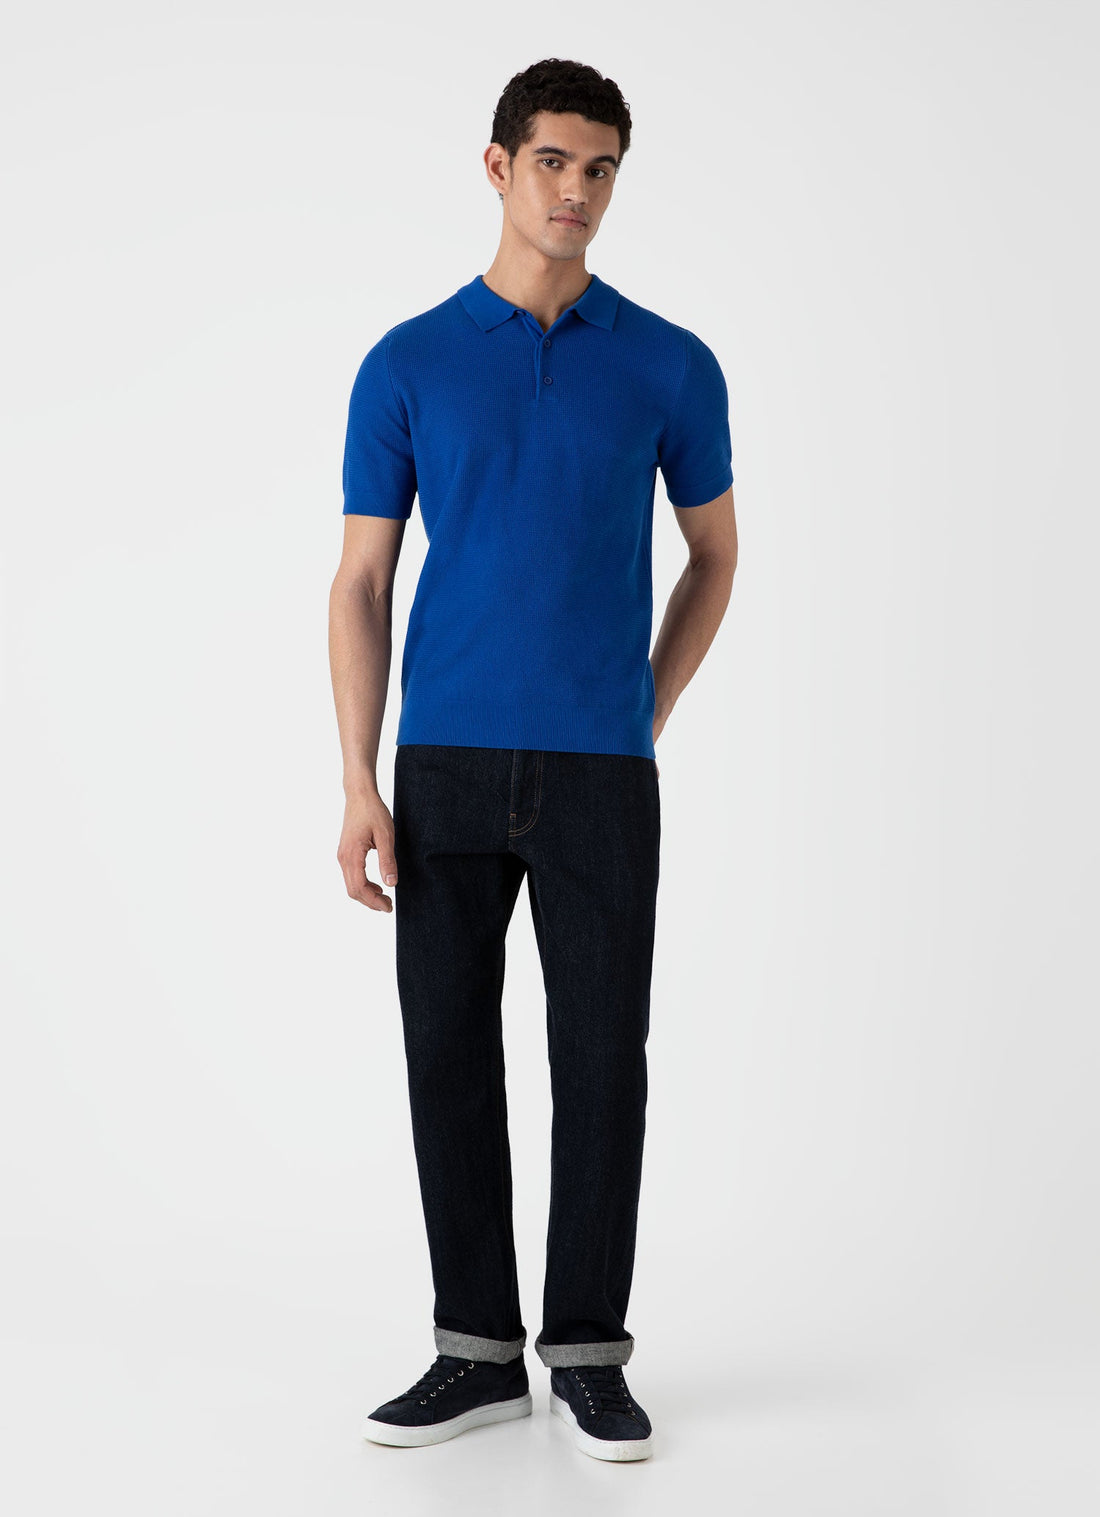 Men's Sunspel x MR PORTER Racked Stitch Polo Shirt in French Blue